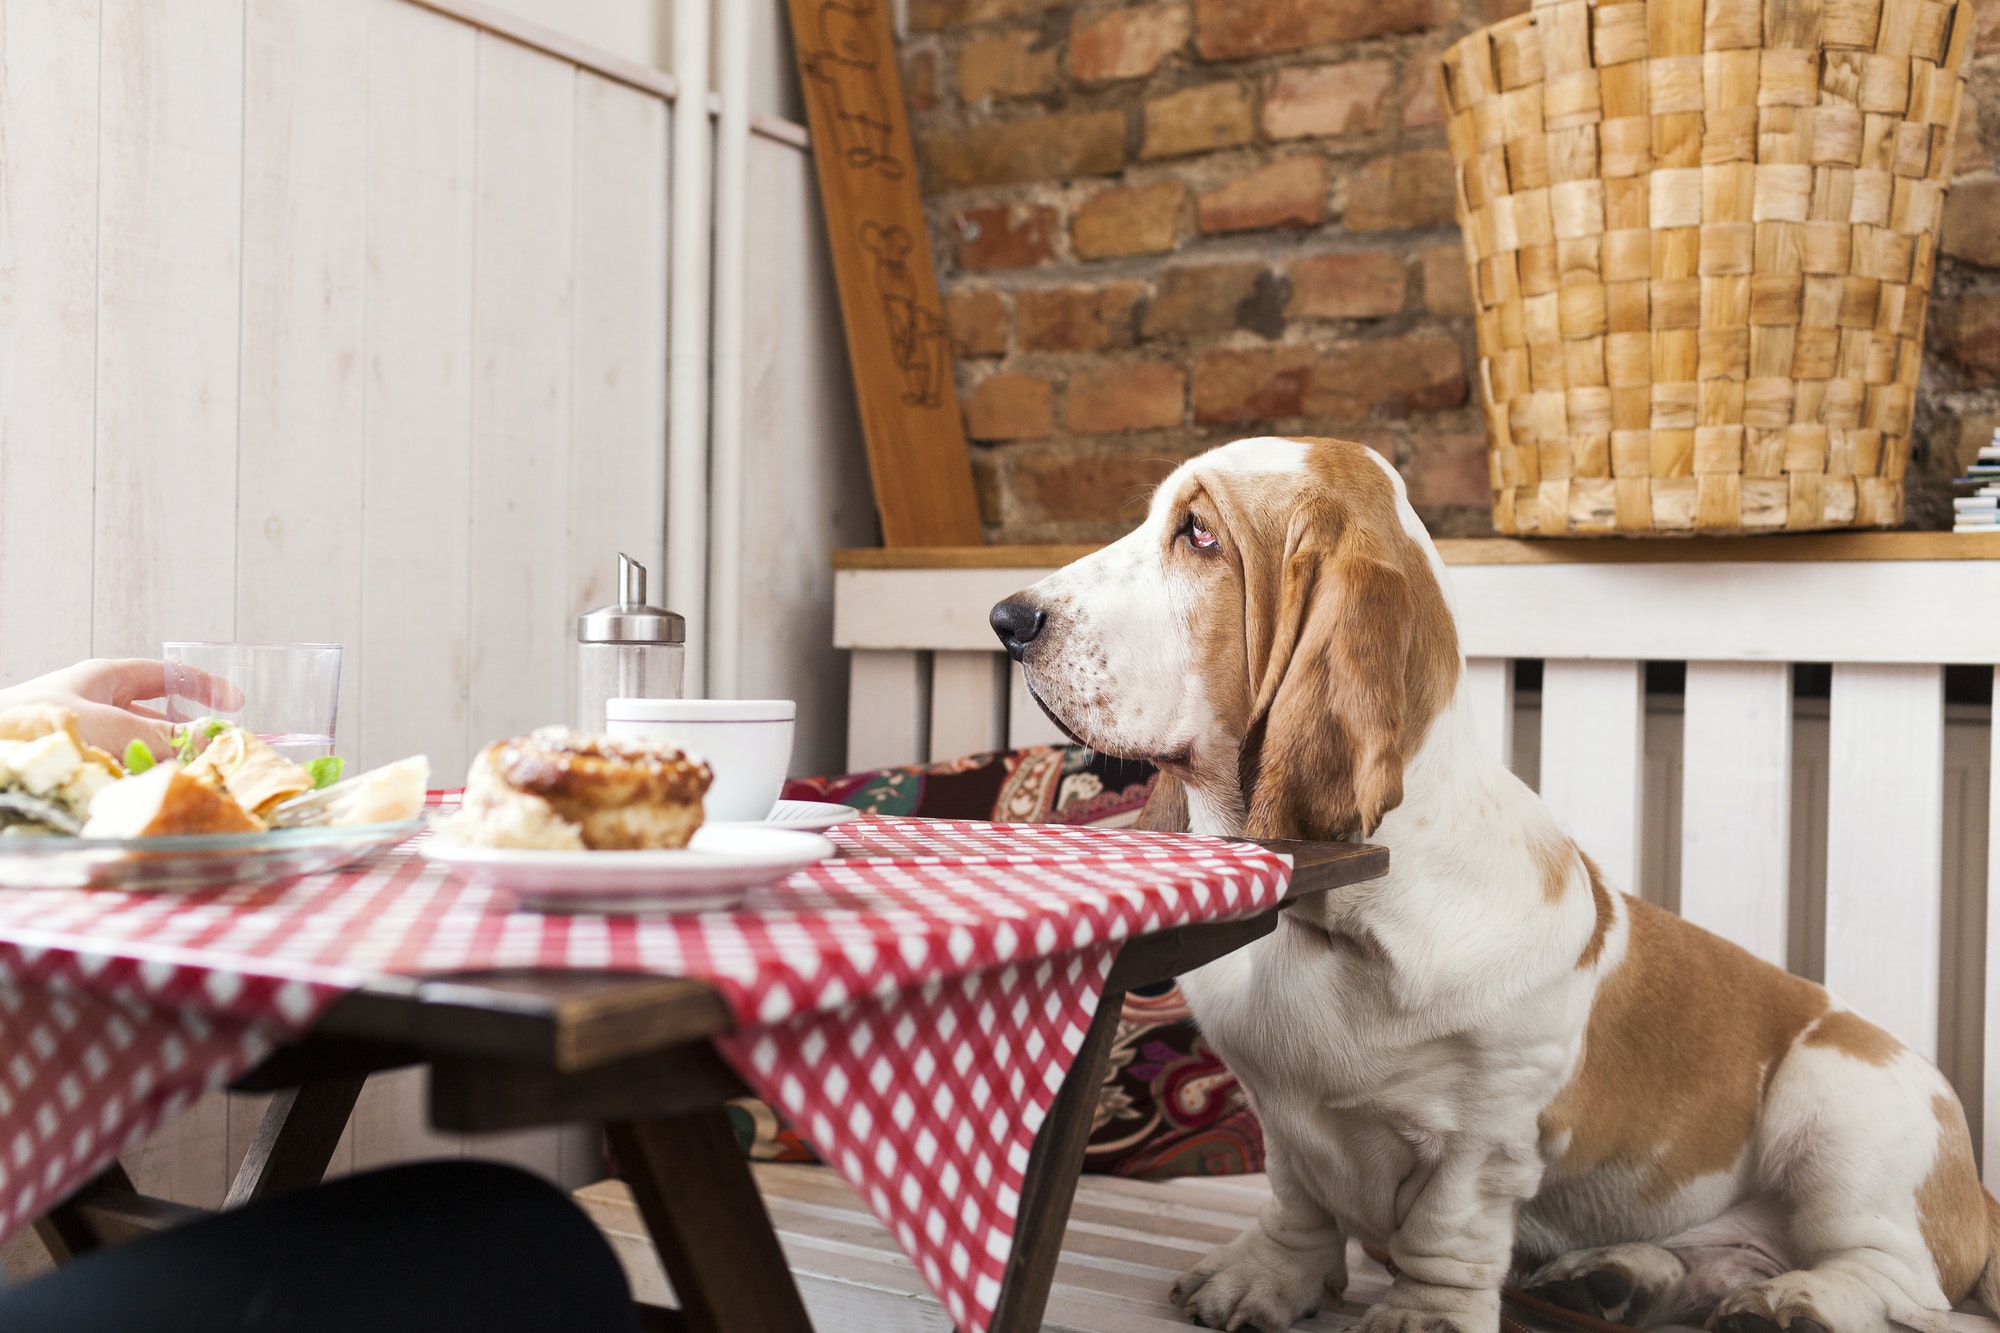 Basset Hound sitting at table in cafeteria